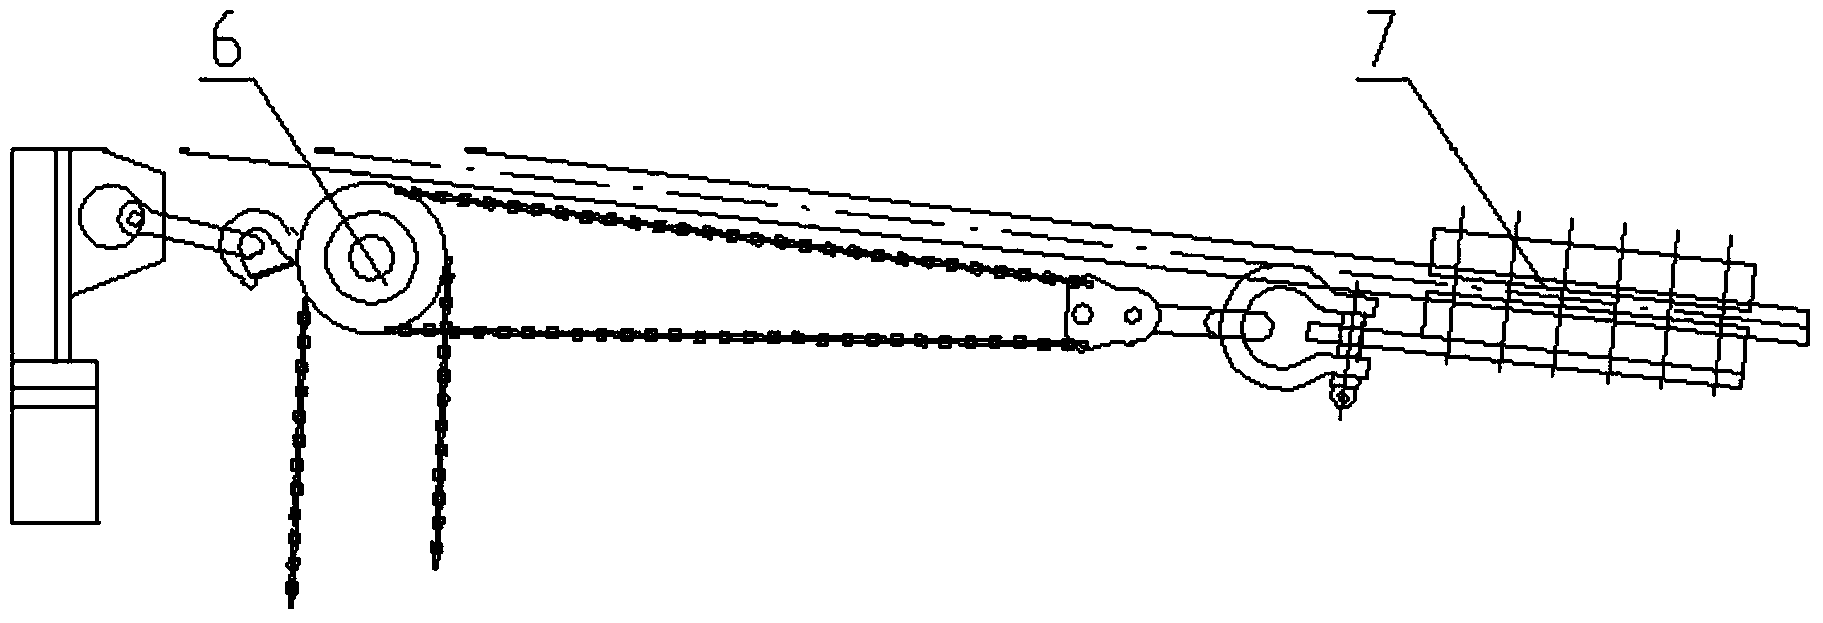 Cable-driving rope replacing mechanism